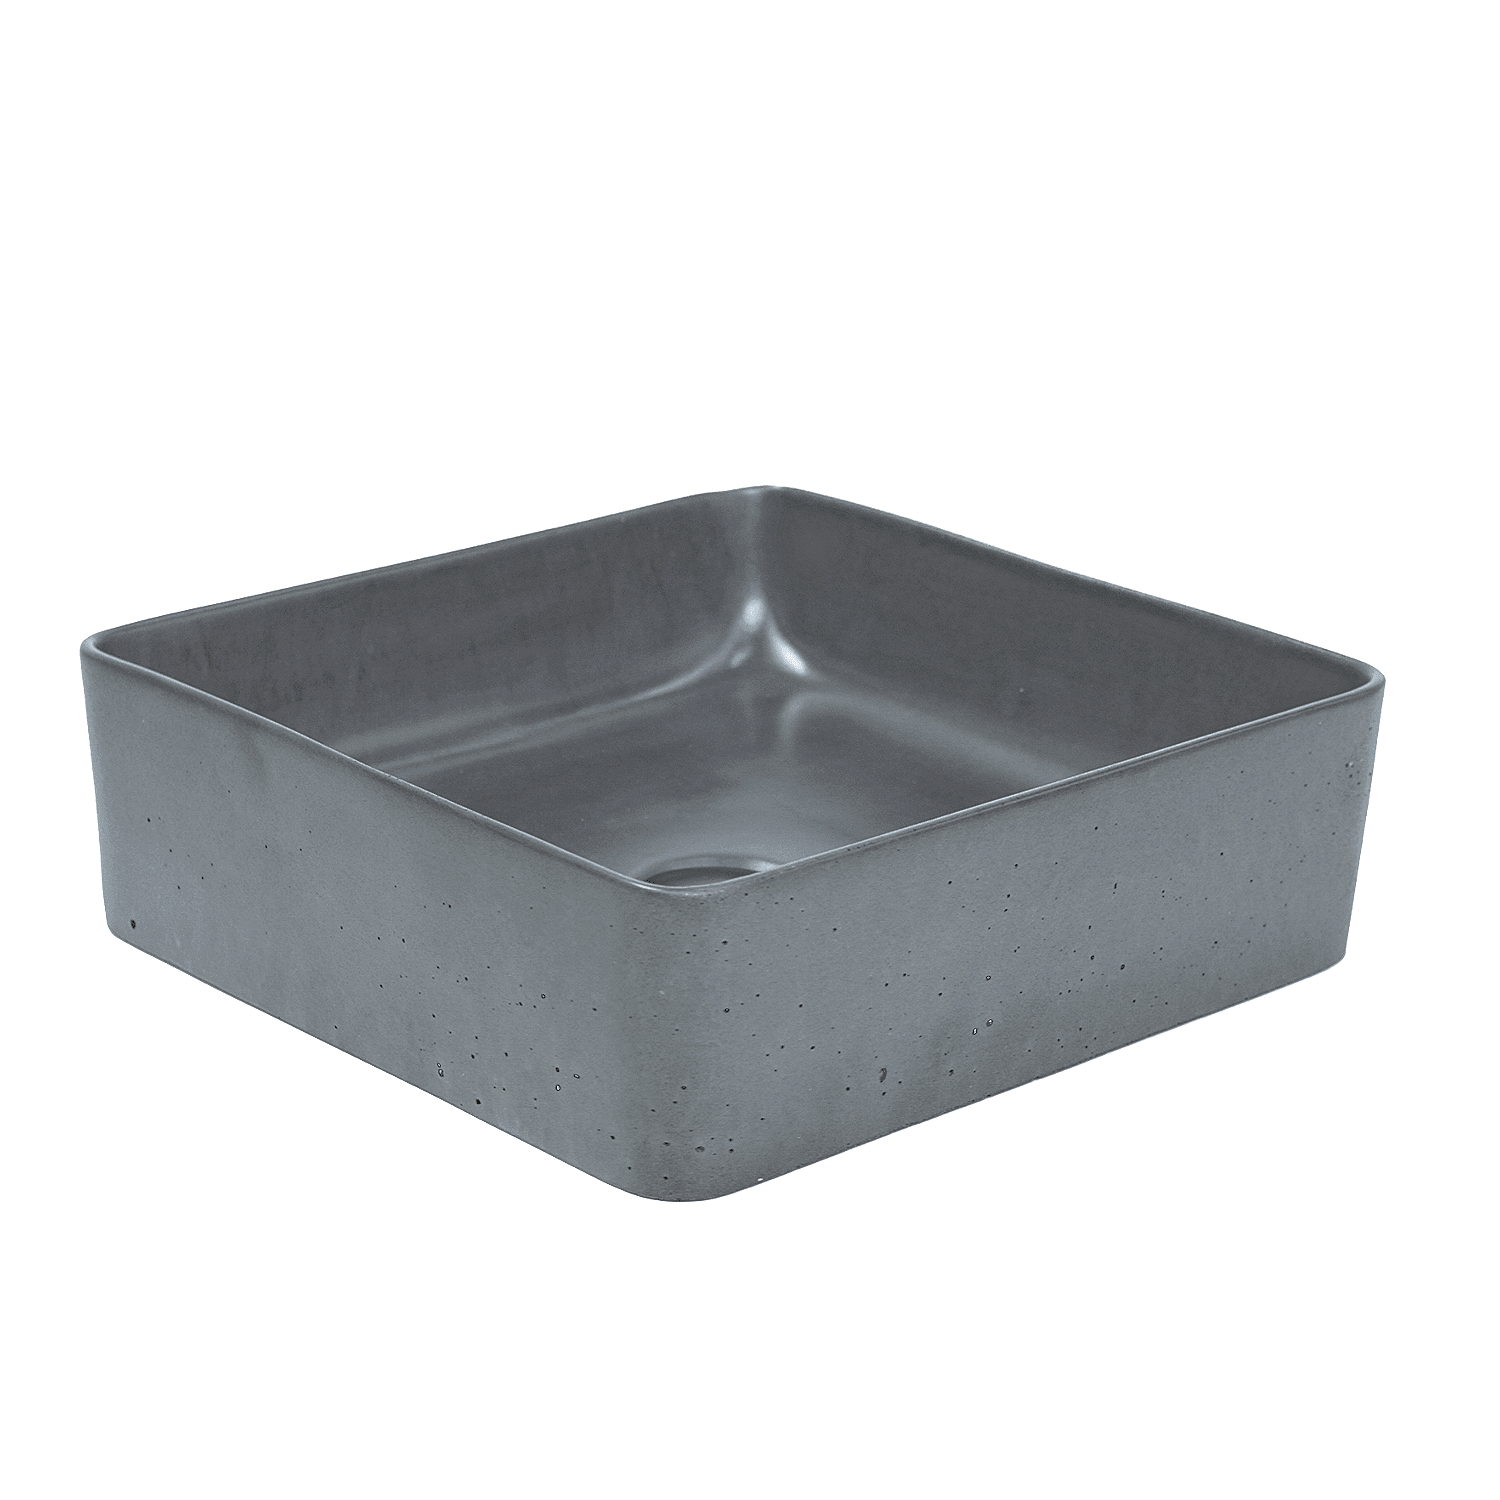 New Form Concrete Rounded Square Vessel Basin 360mm X 360mm X 115mm - Burdens Plumbing